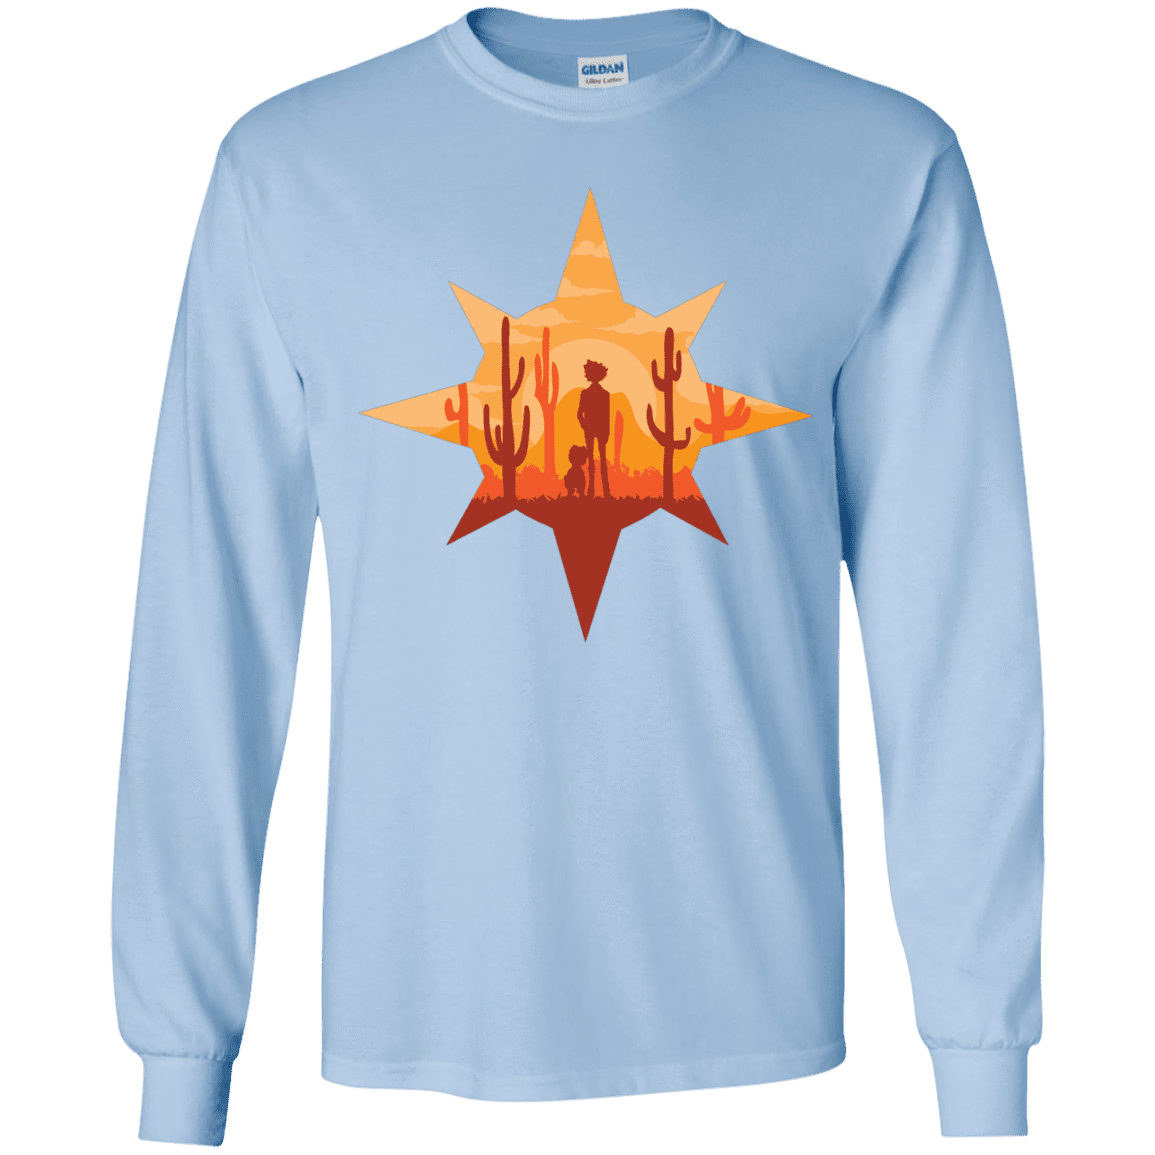 T-Shirts Light Blue / YS Courage Youth Long Sleeve T-Shirt